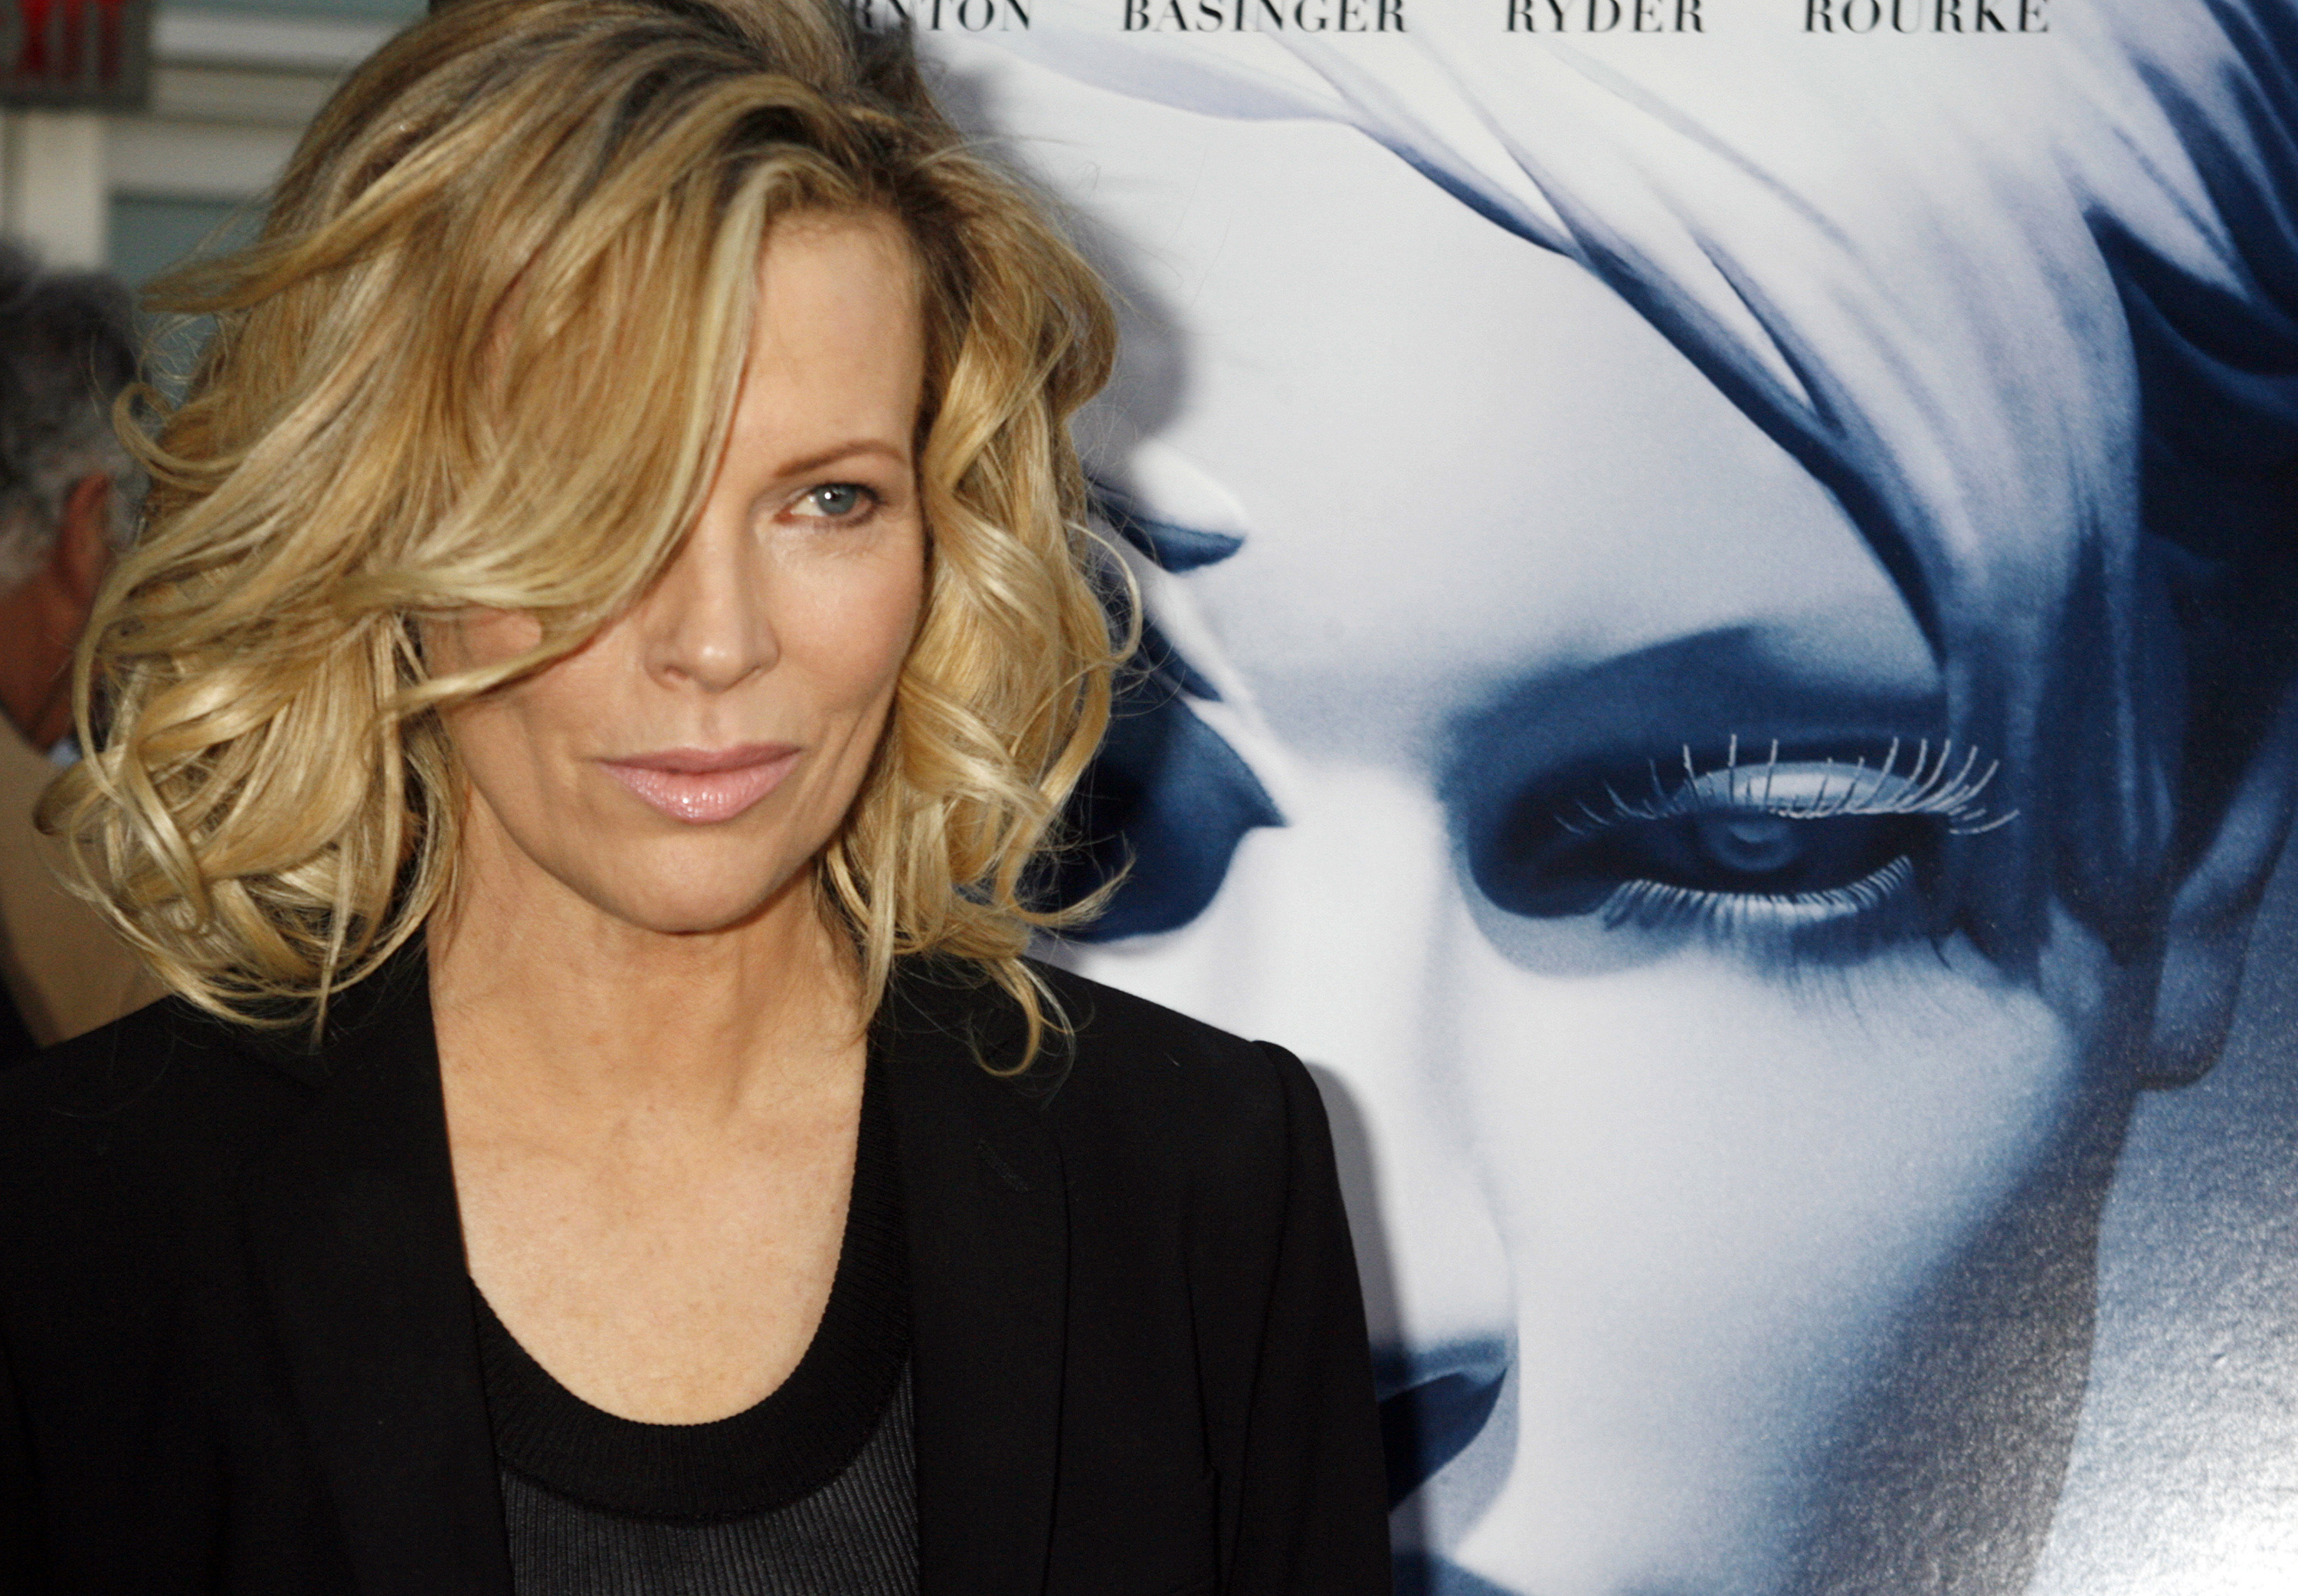 Actress Kim Basinger, star of the film "The Informers", poses at the film's premiere in Hollywood